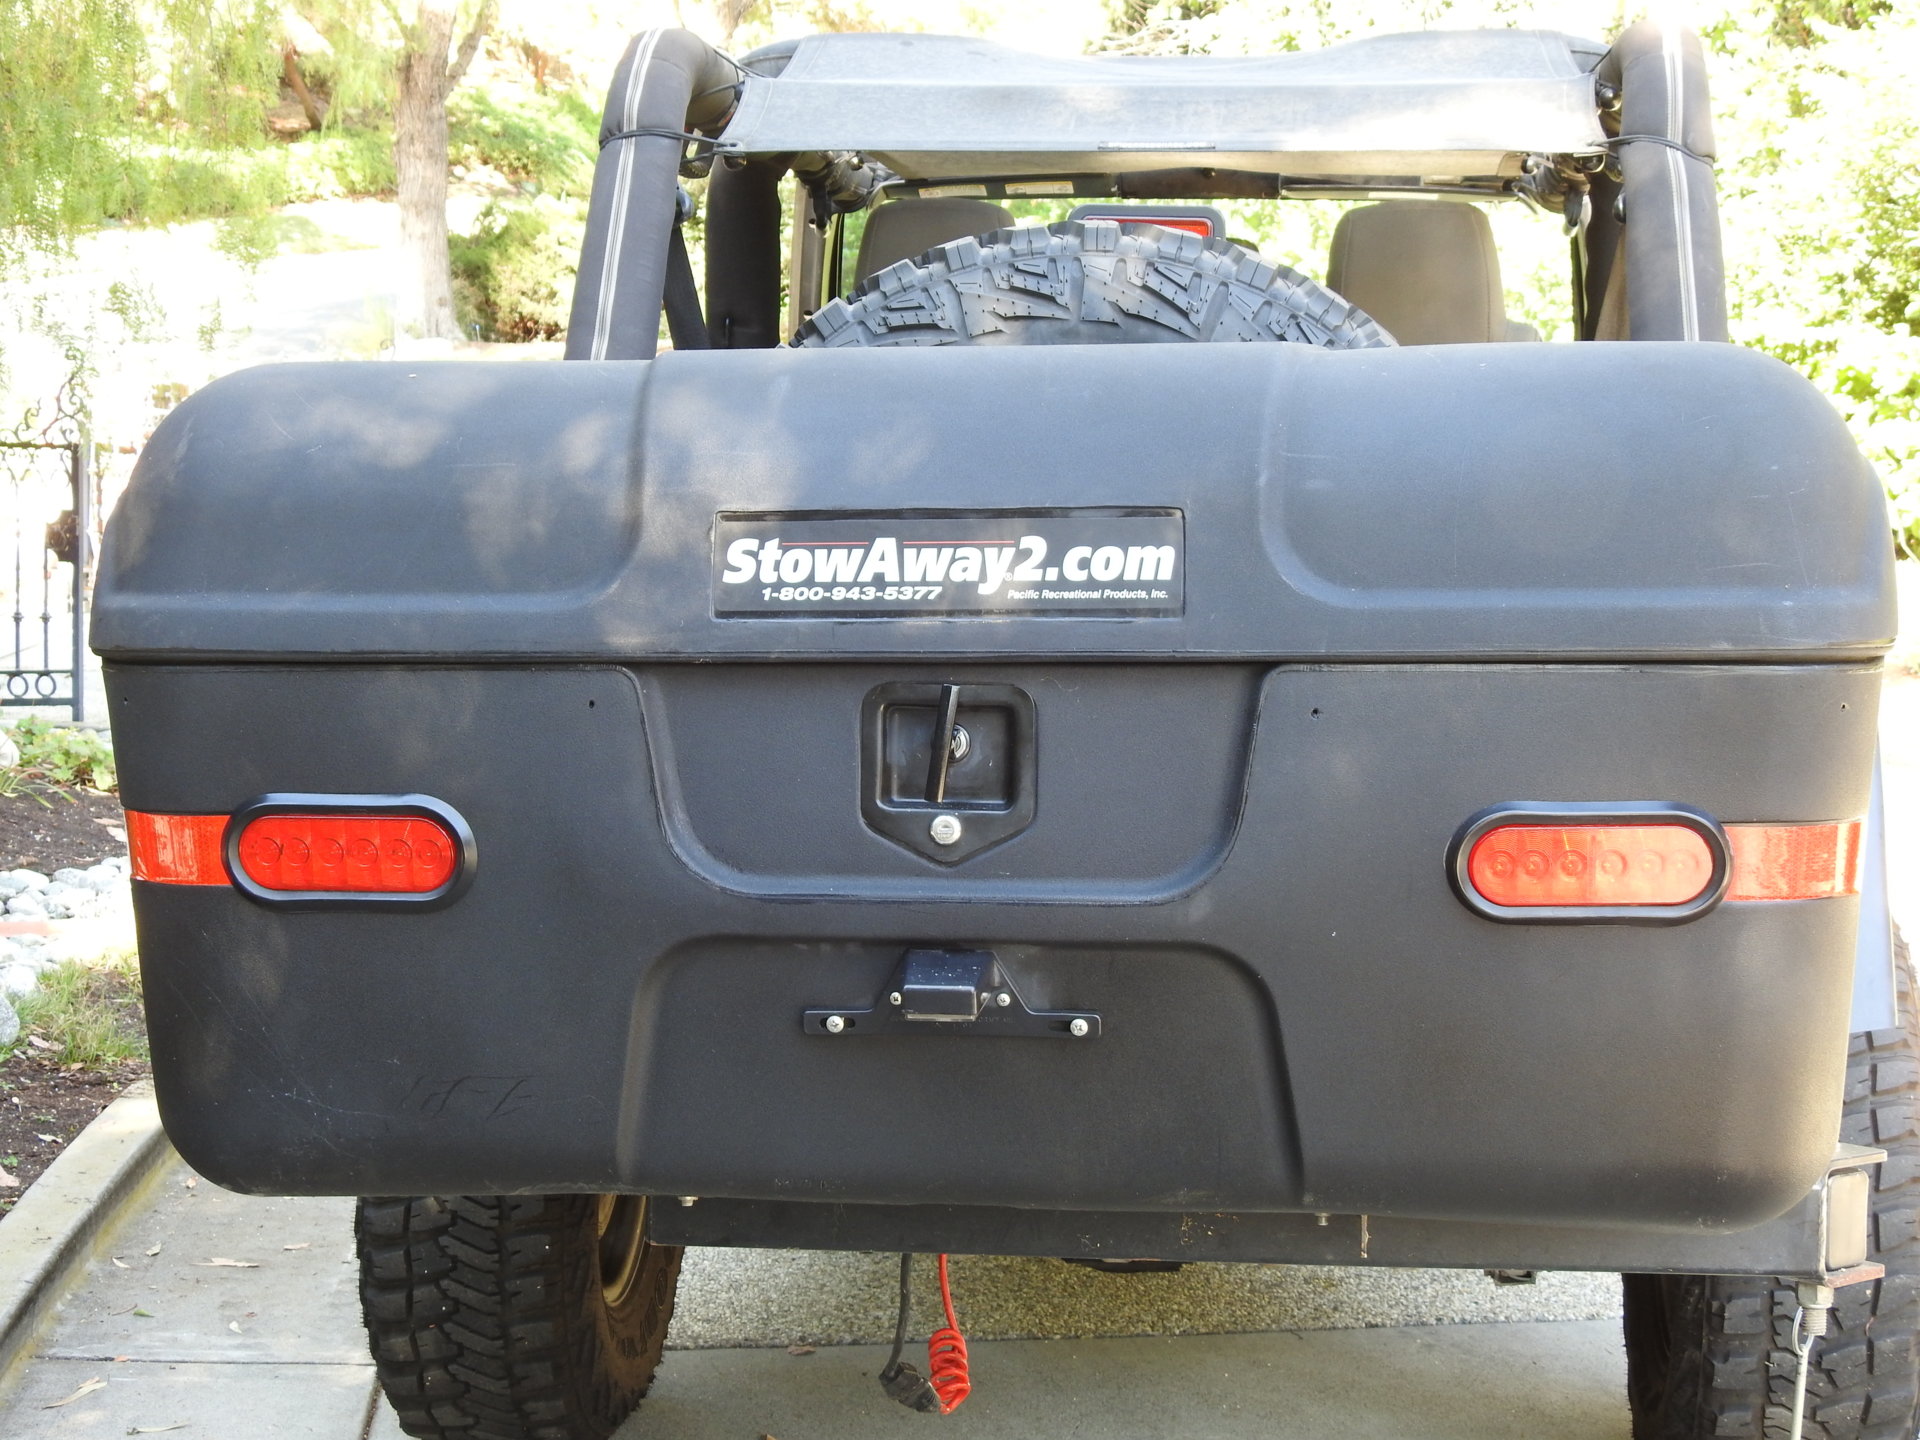 SOLD - SoCal: StowAway2 Max Swing Out Hitch Cargo Box | IH8MUD Forum Stowaway Carriers Max Cargo Box Swing Away Frame